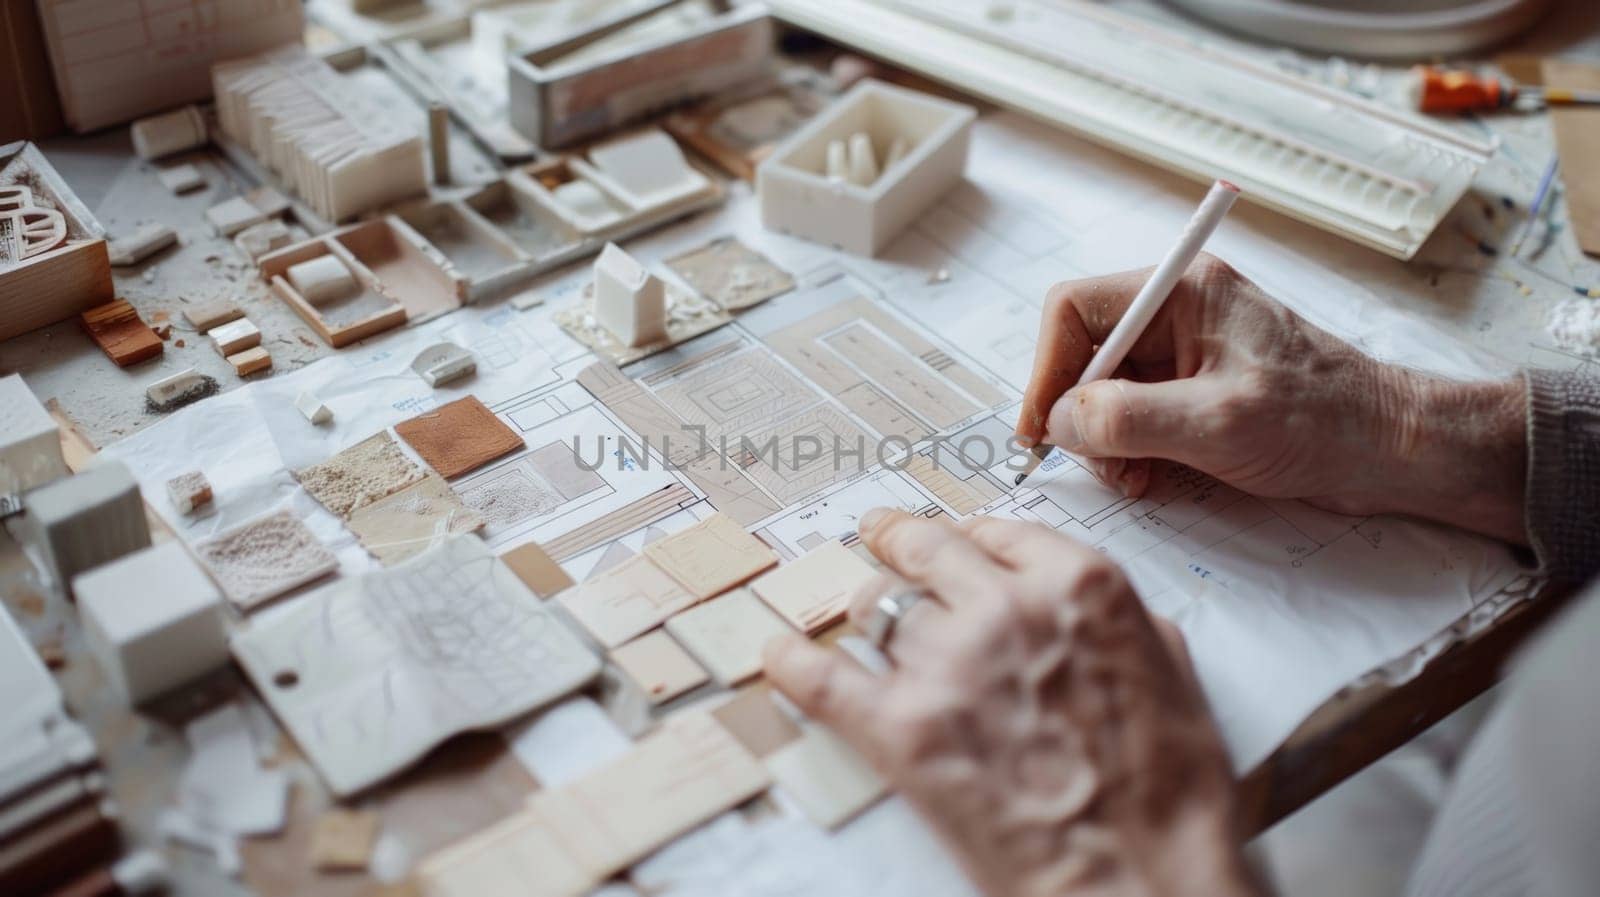 A person is meticulously arranging tiles on a table, creating a stunning mosaic masterpiece for a project renovation sketch with detailed plans and design ideas.